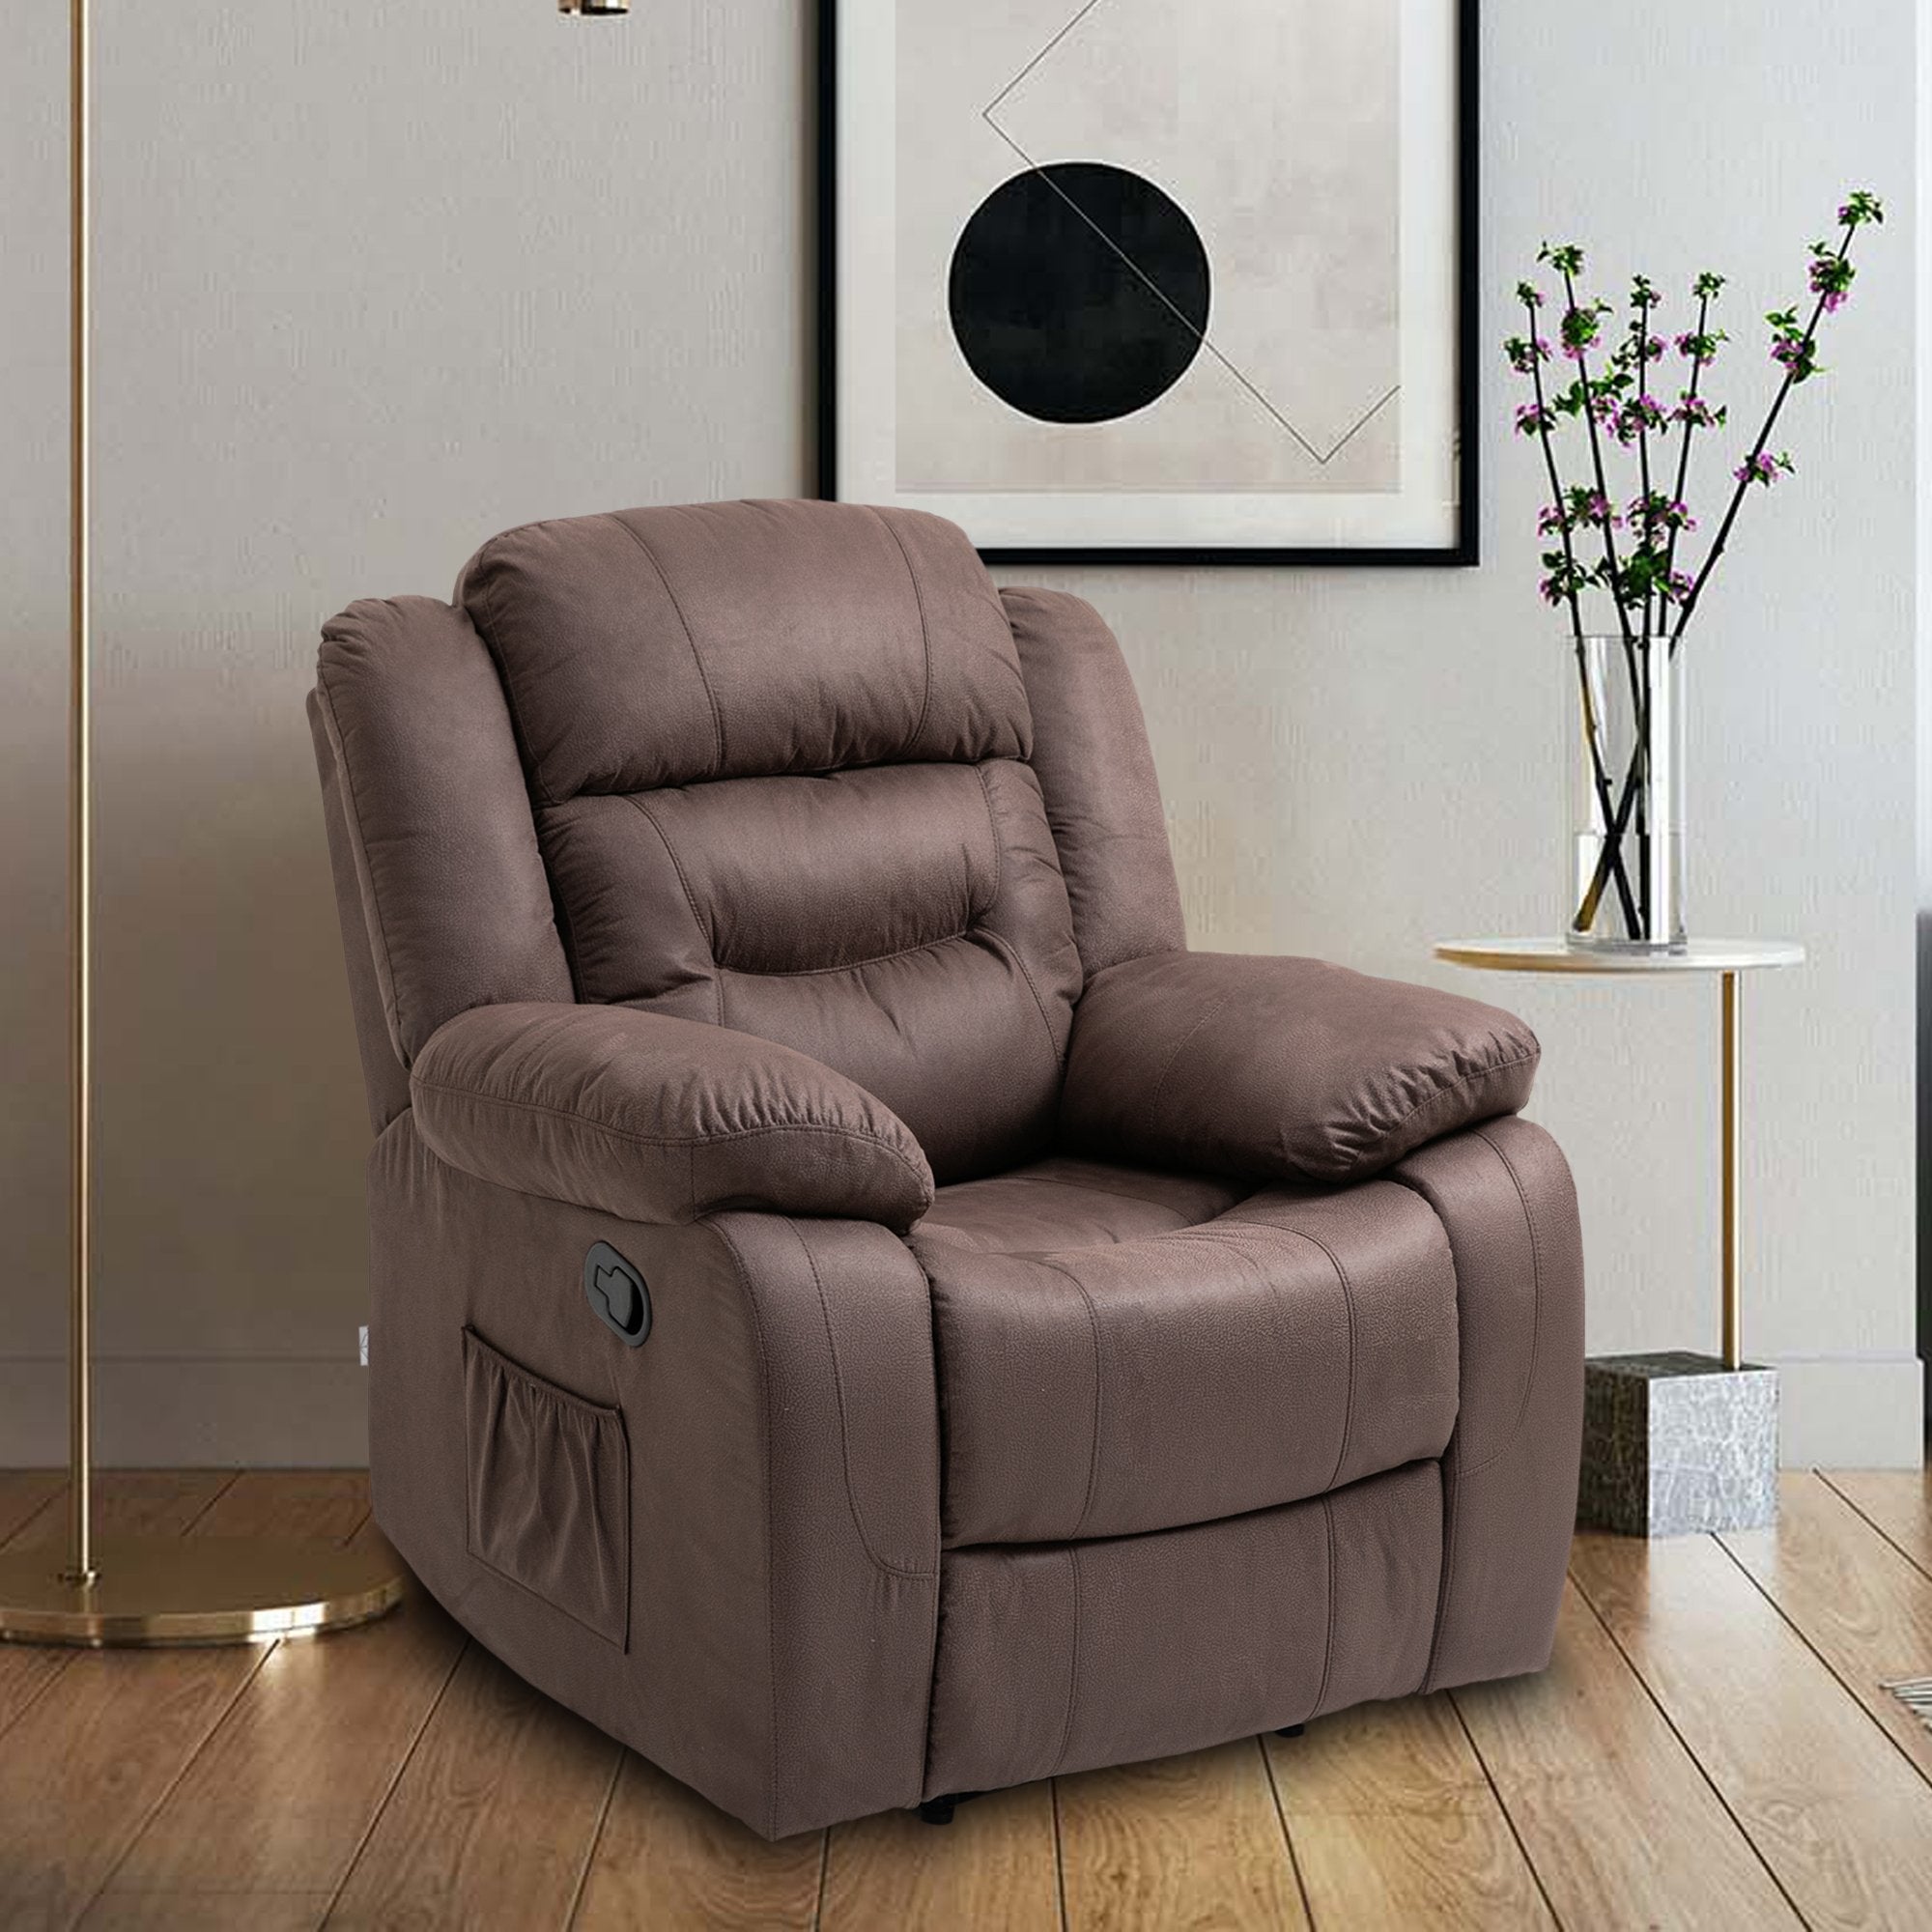 Recliner in Elephant Fabric